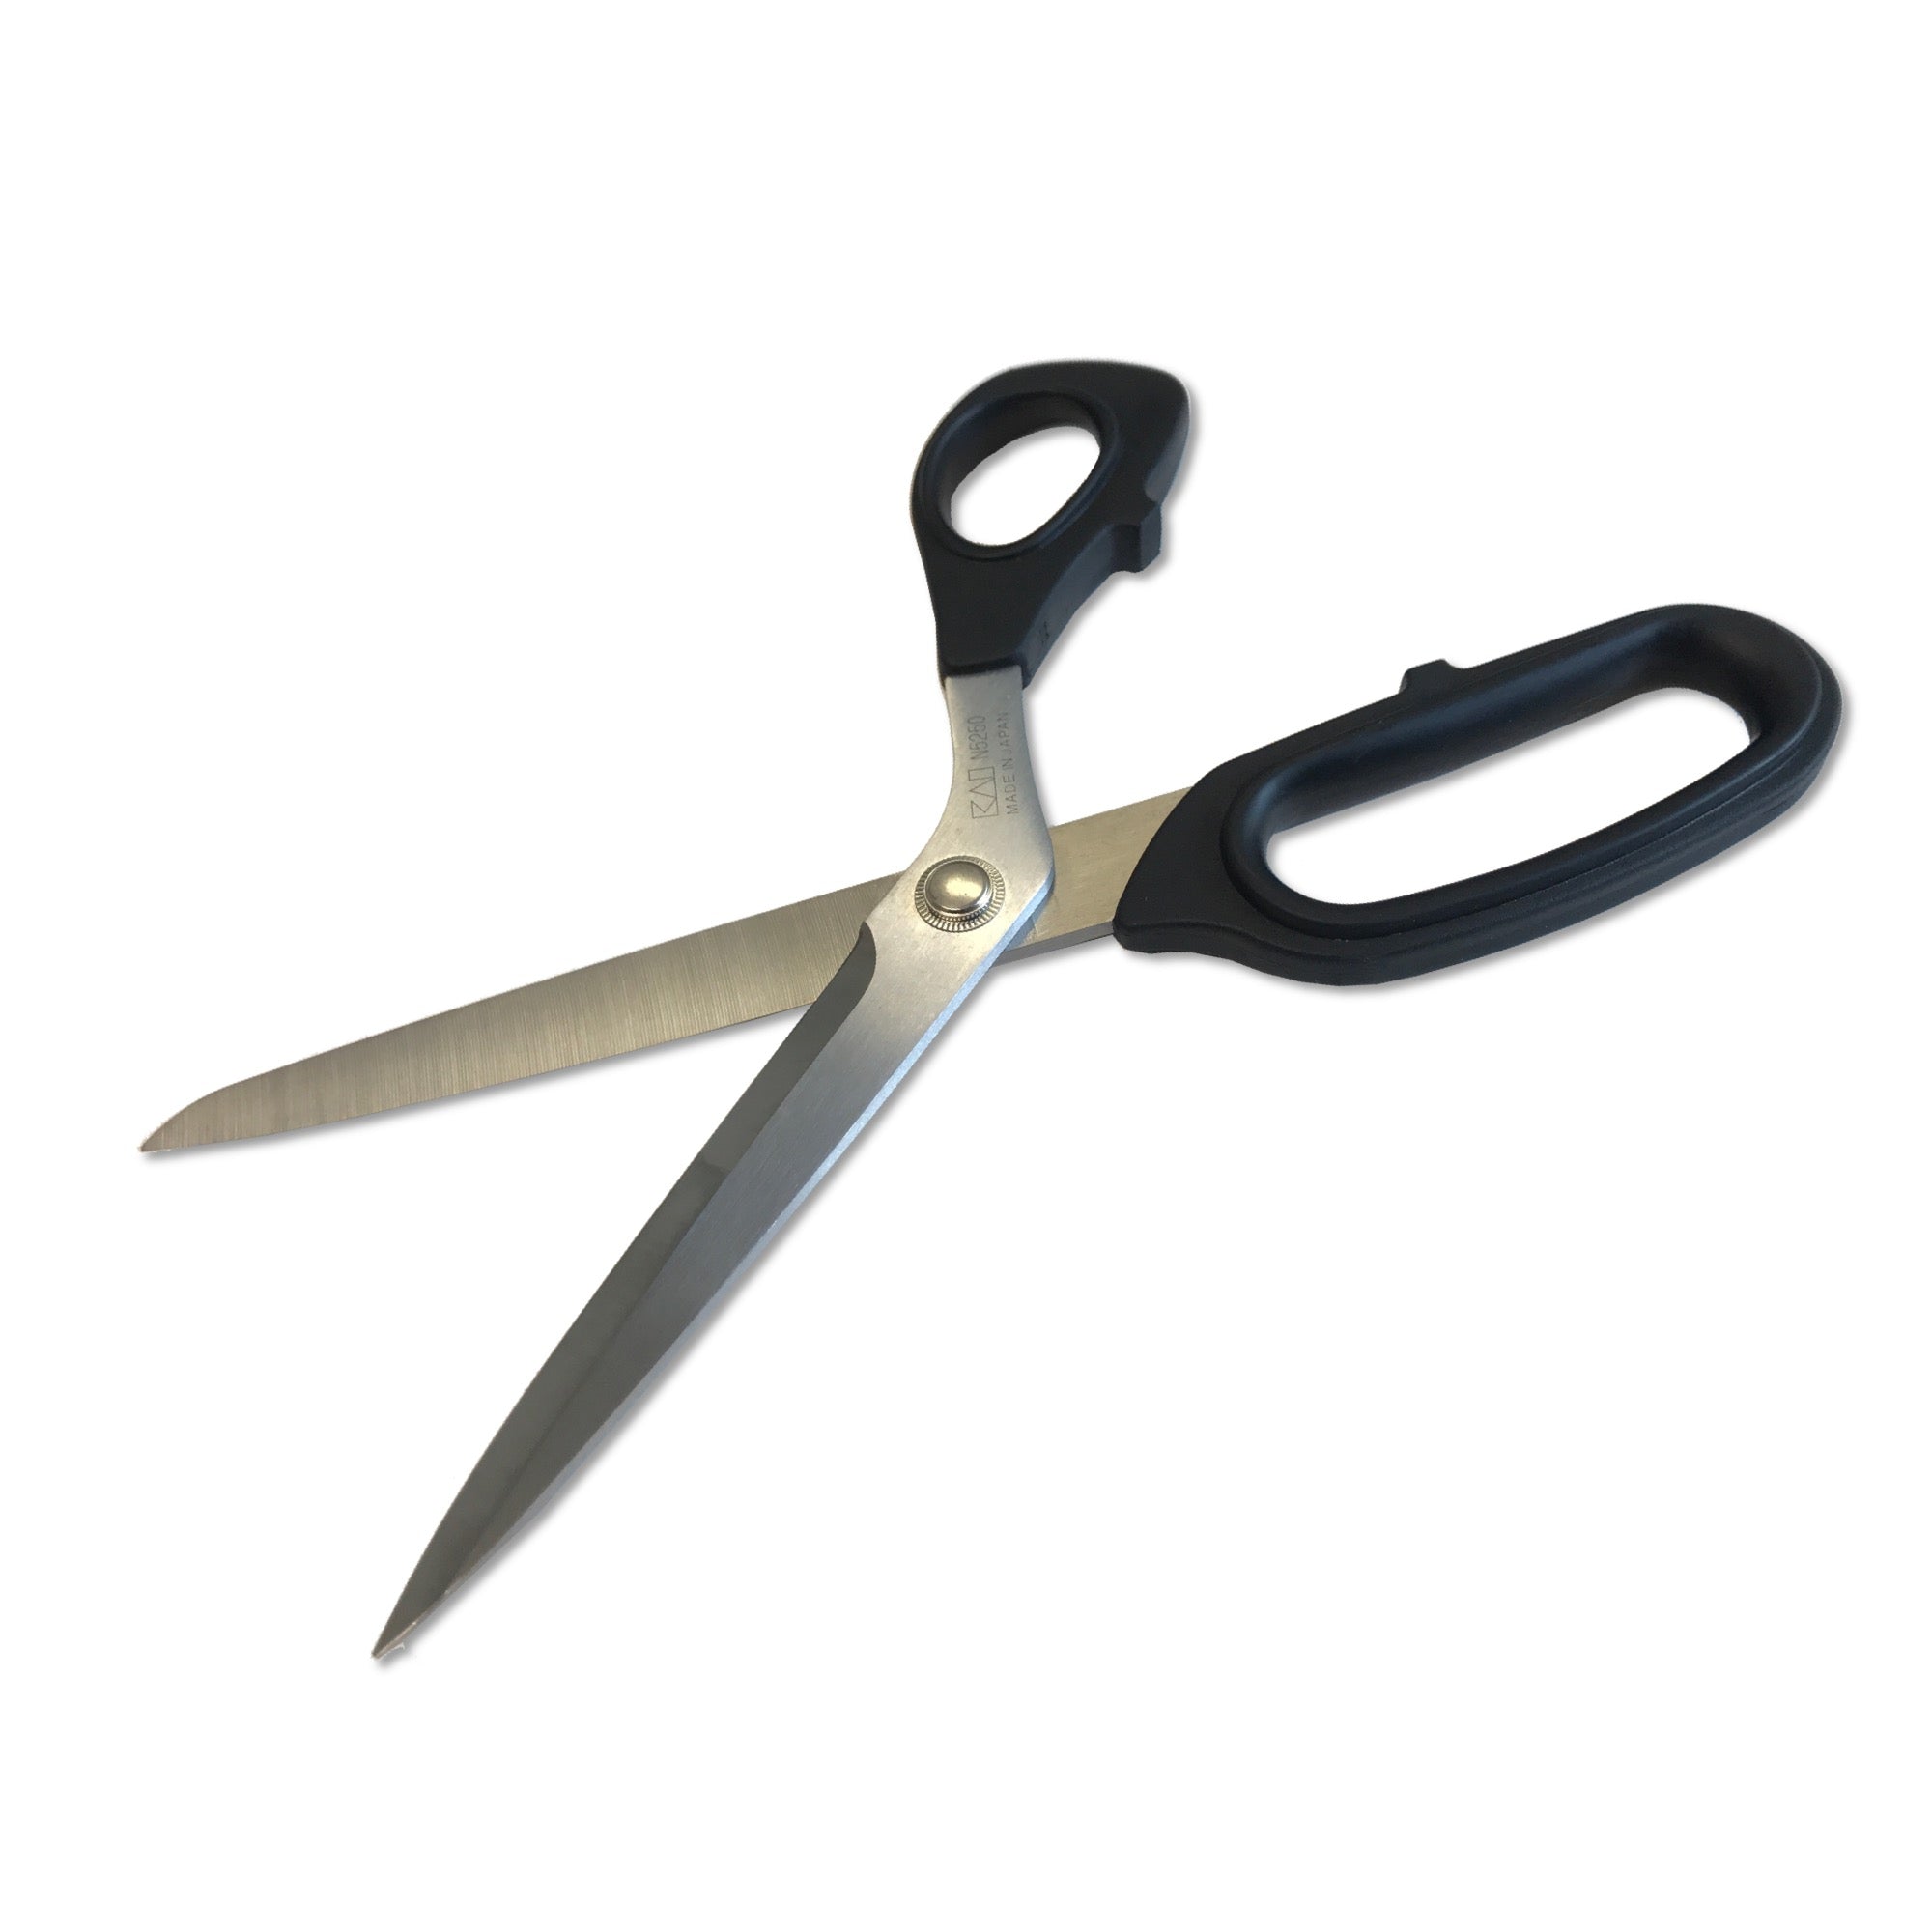 10 Inch Poultry Shears, Stainless Steel